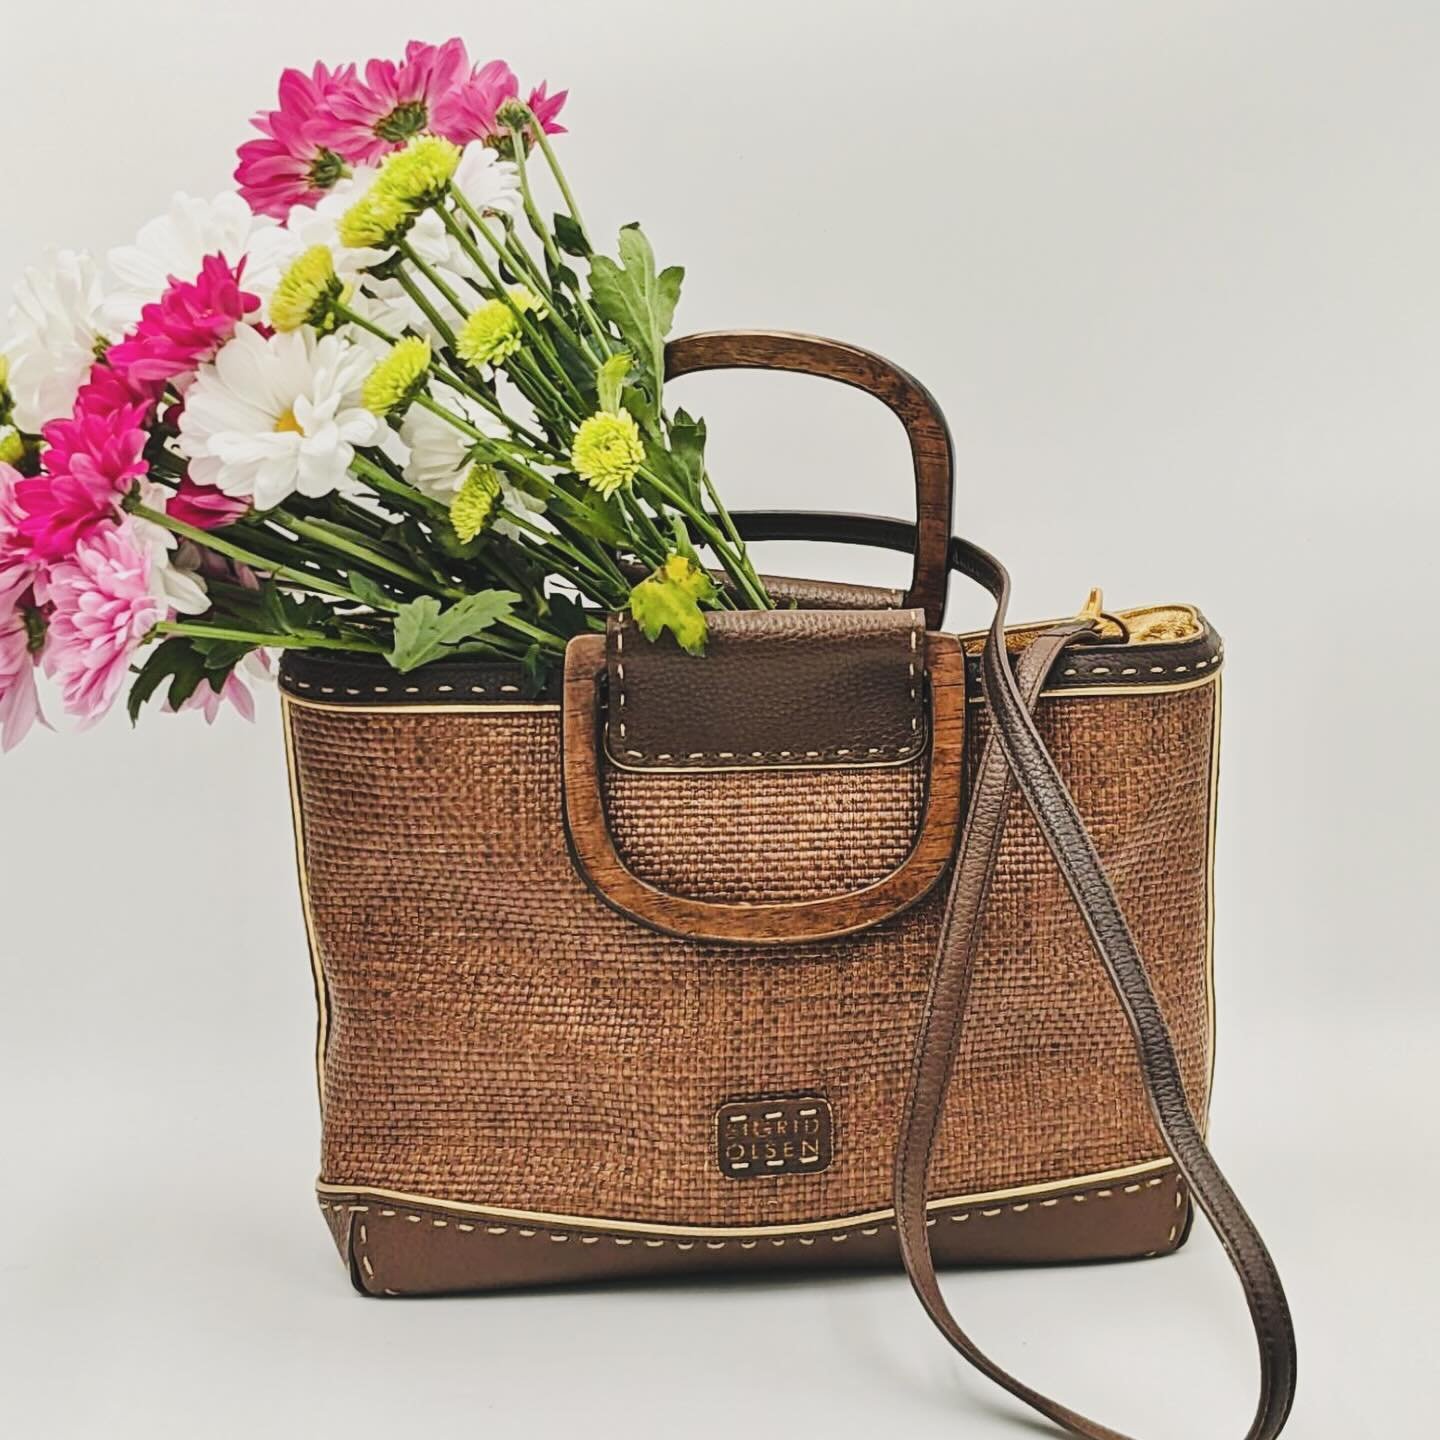 That&rsquo;s one way to give mom her Mother&rsquo;s Day flowers! 🌸🌷🌼 Just arrived - Sigrid Olsen Woven Leather Shoulder Bag. Visit us this week to shop for gifts for every mother figure in your life. ❤️
#thrifted #thriftproud #thriftedgifts #mothe